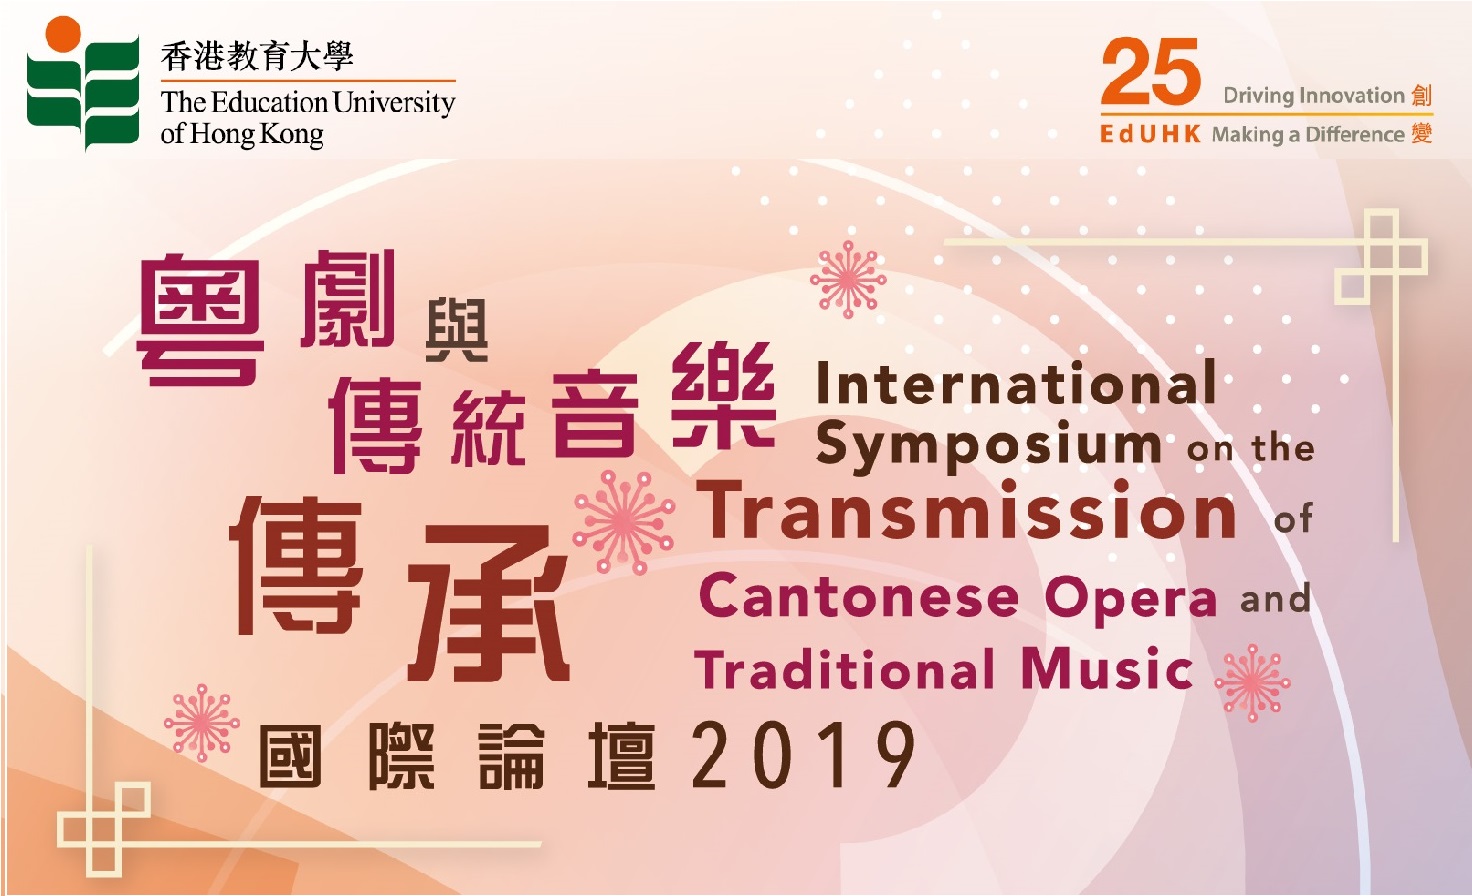 International Symposium on the Transmission of Cantonese Opera and Traditional Music 2019